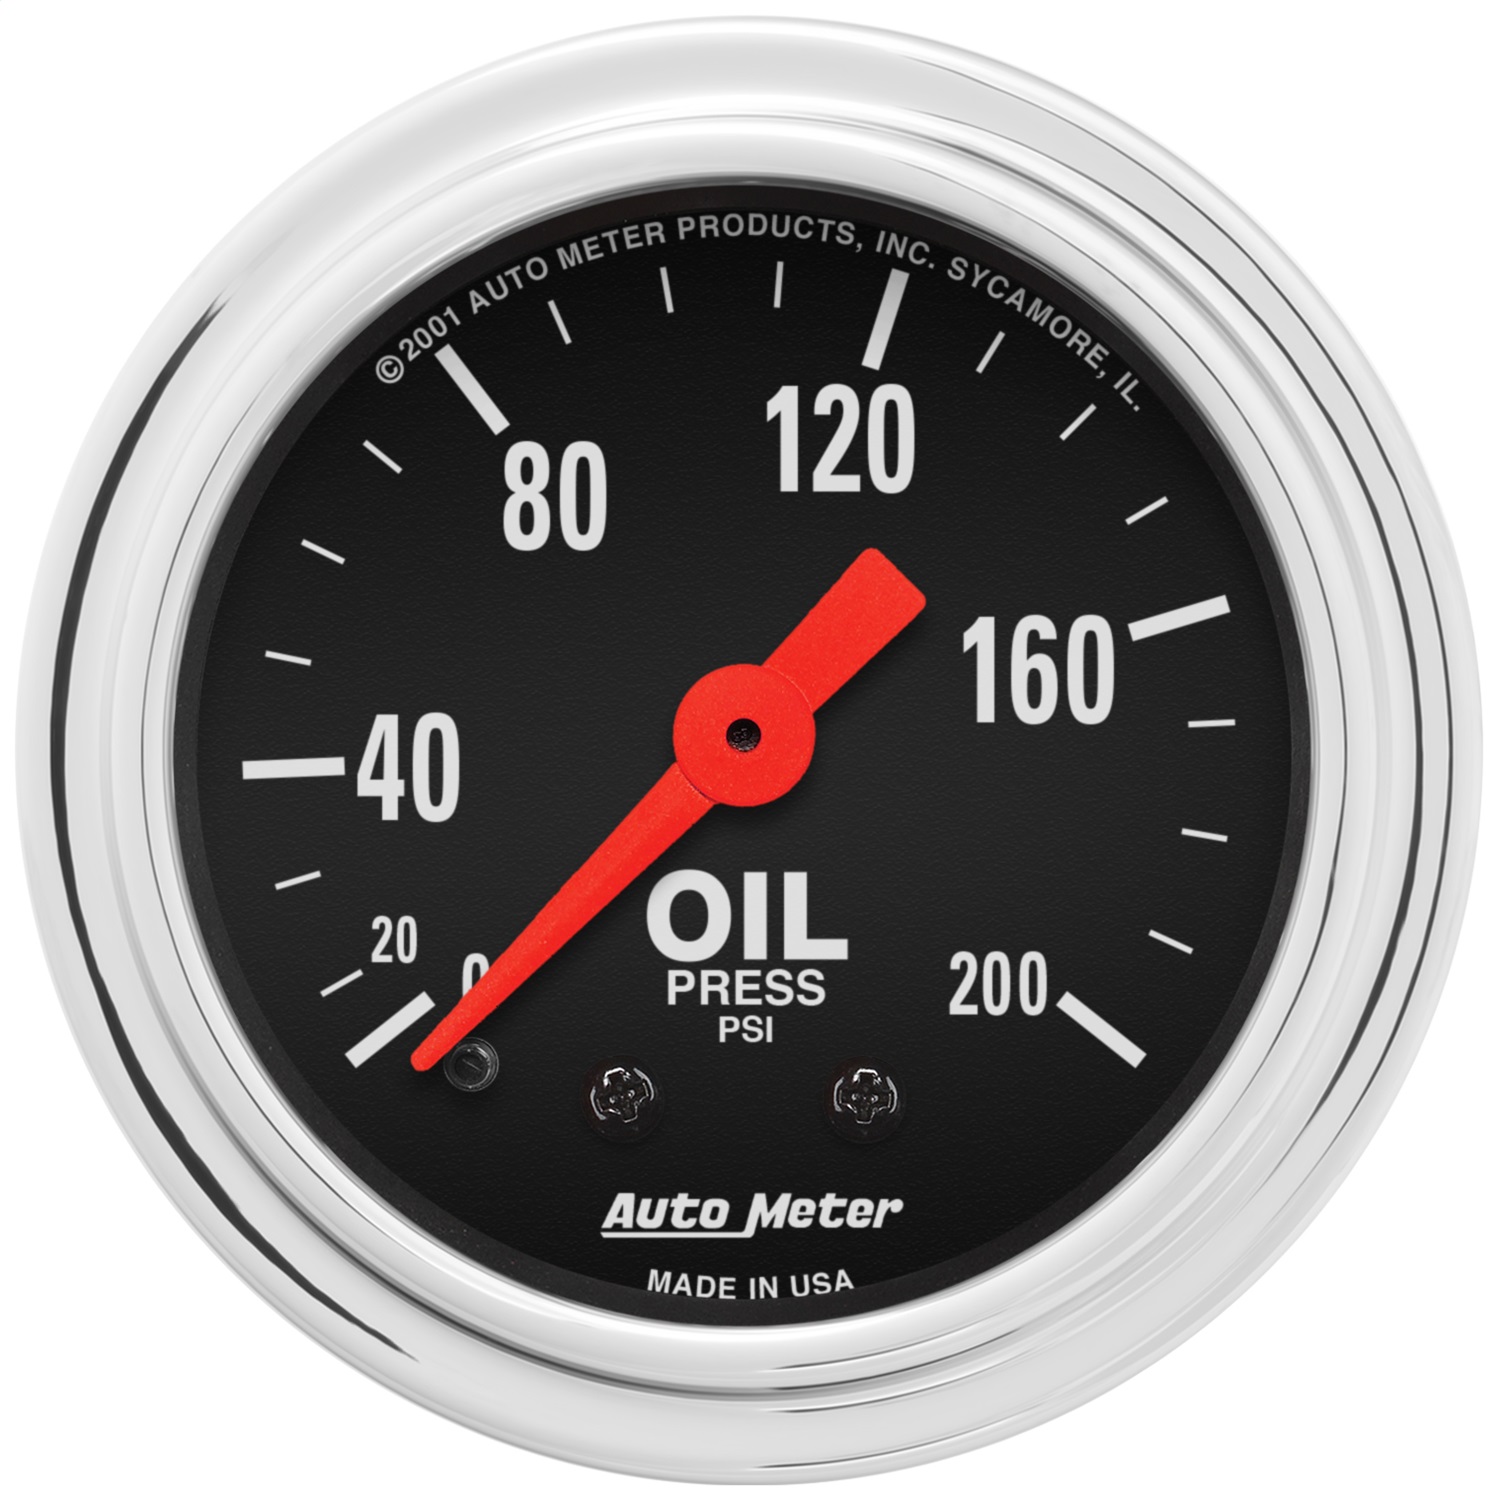 Auto Meter Auto Meter 2422 Traditional Chrome Mechanical Oil Pressure Gauge